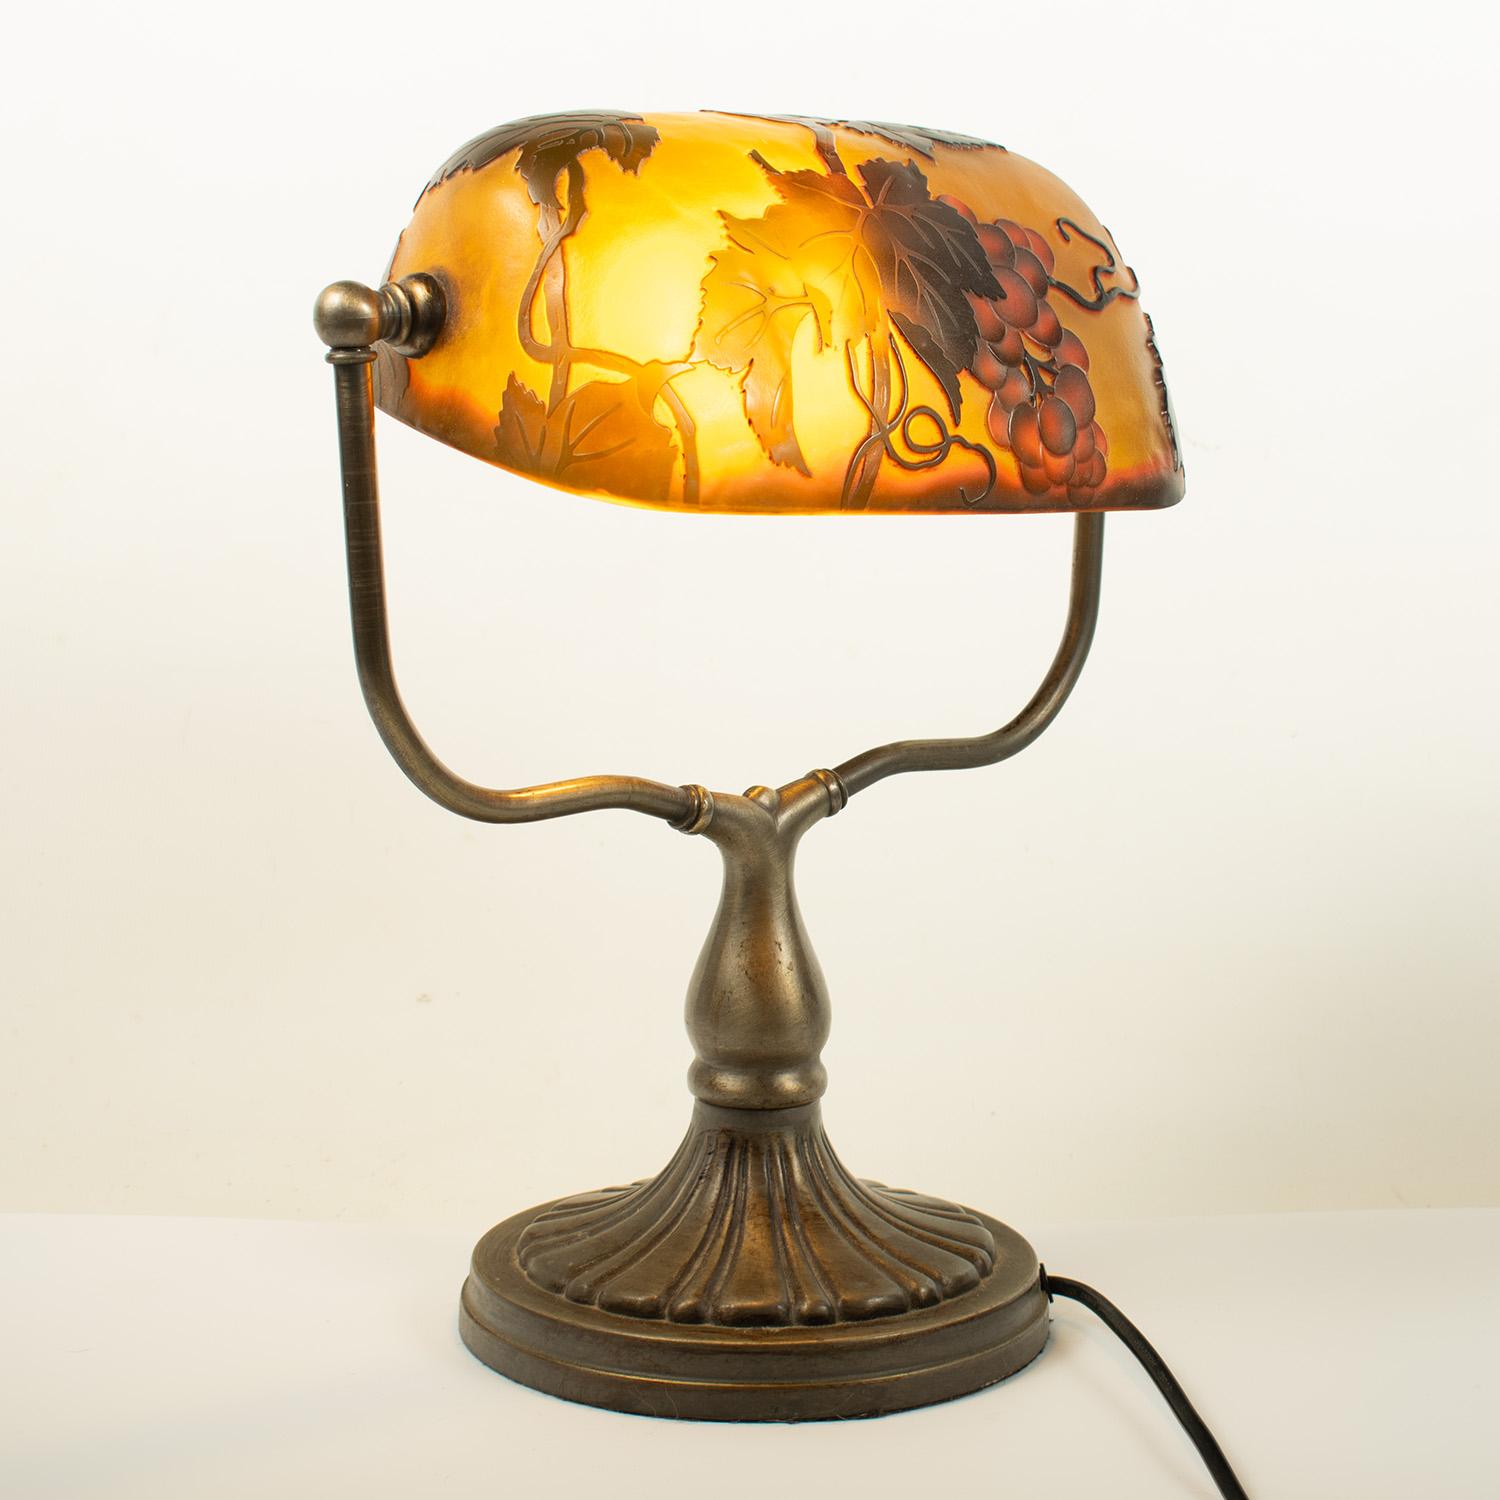 European Art Nouveau Desk lamp in the style of Emile GALLE with multilayer glass For Sale